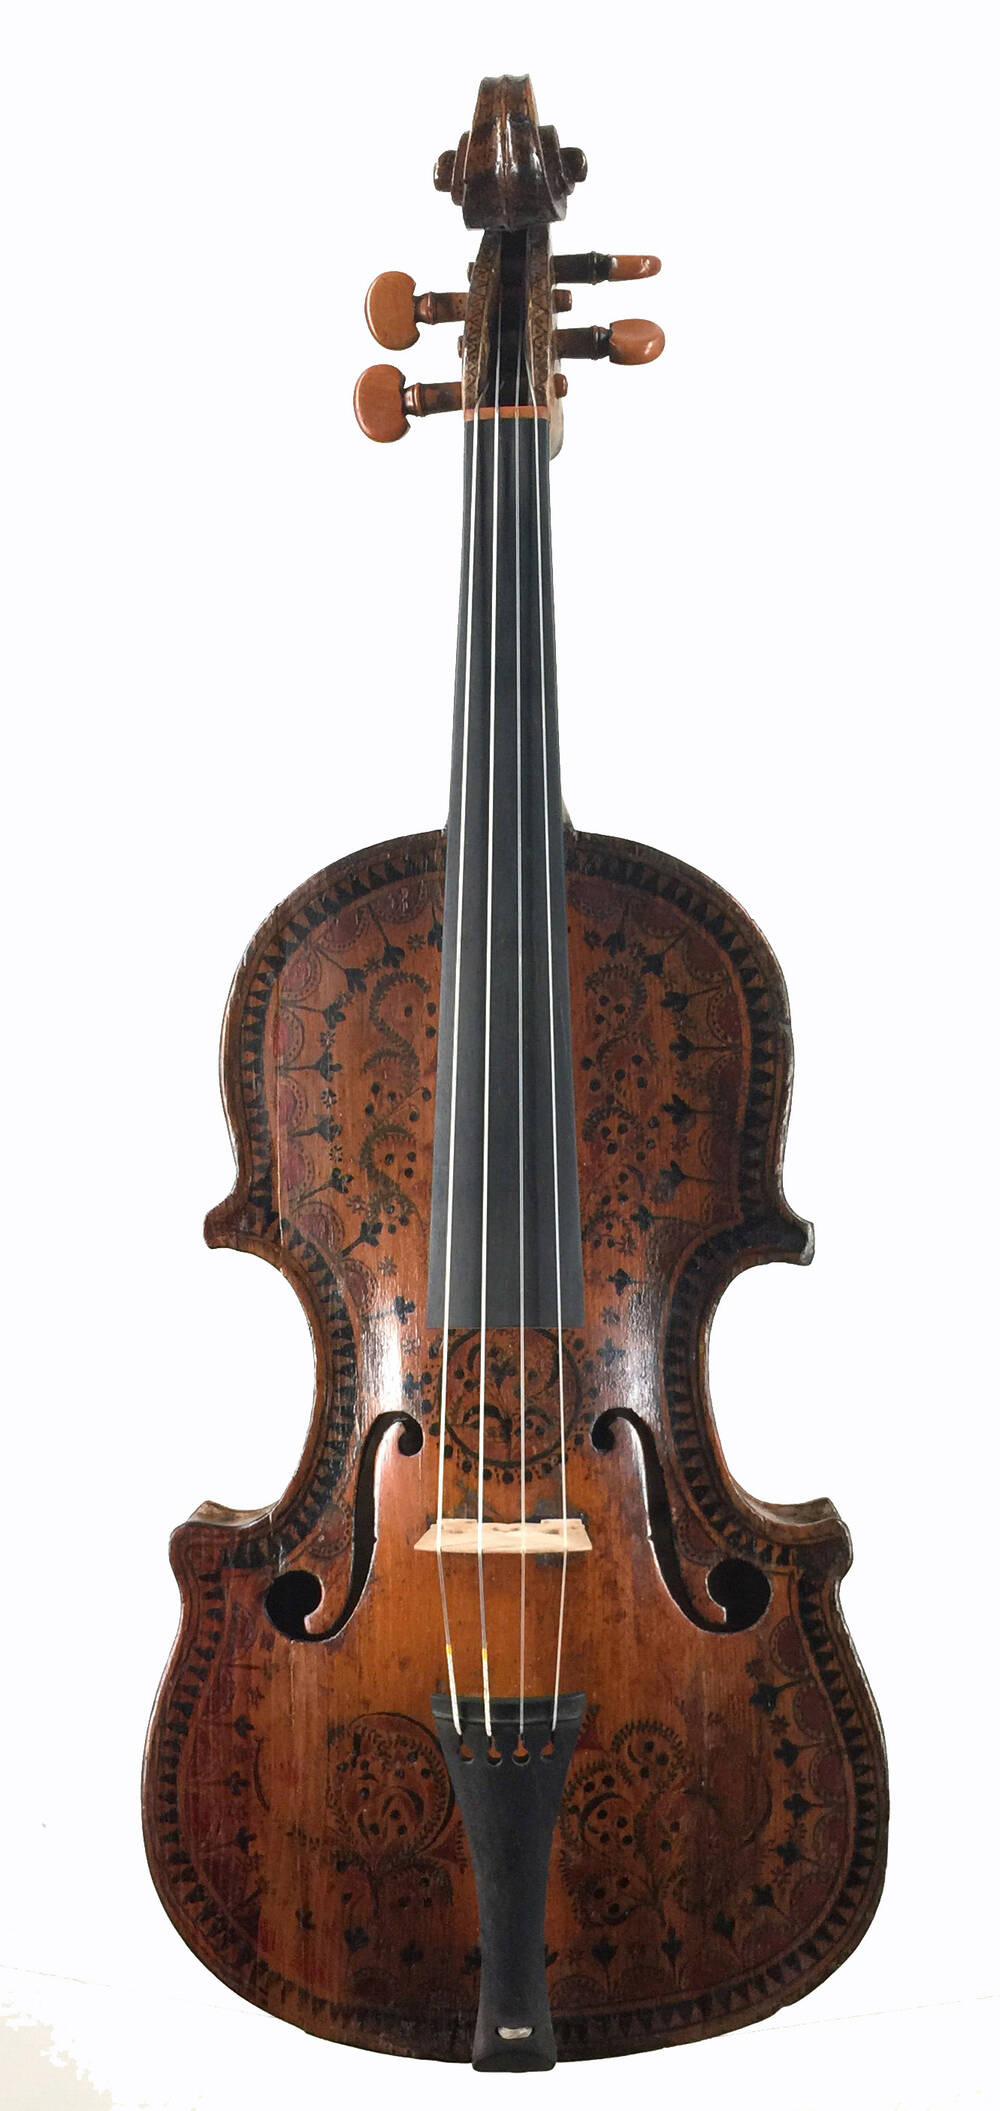 A fiddle is displayed face on, with the pegs at the top. The body is beautifully carved with floral images and decorative swirls.